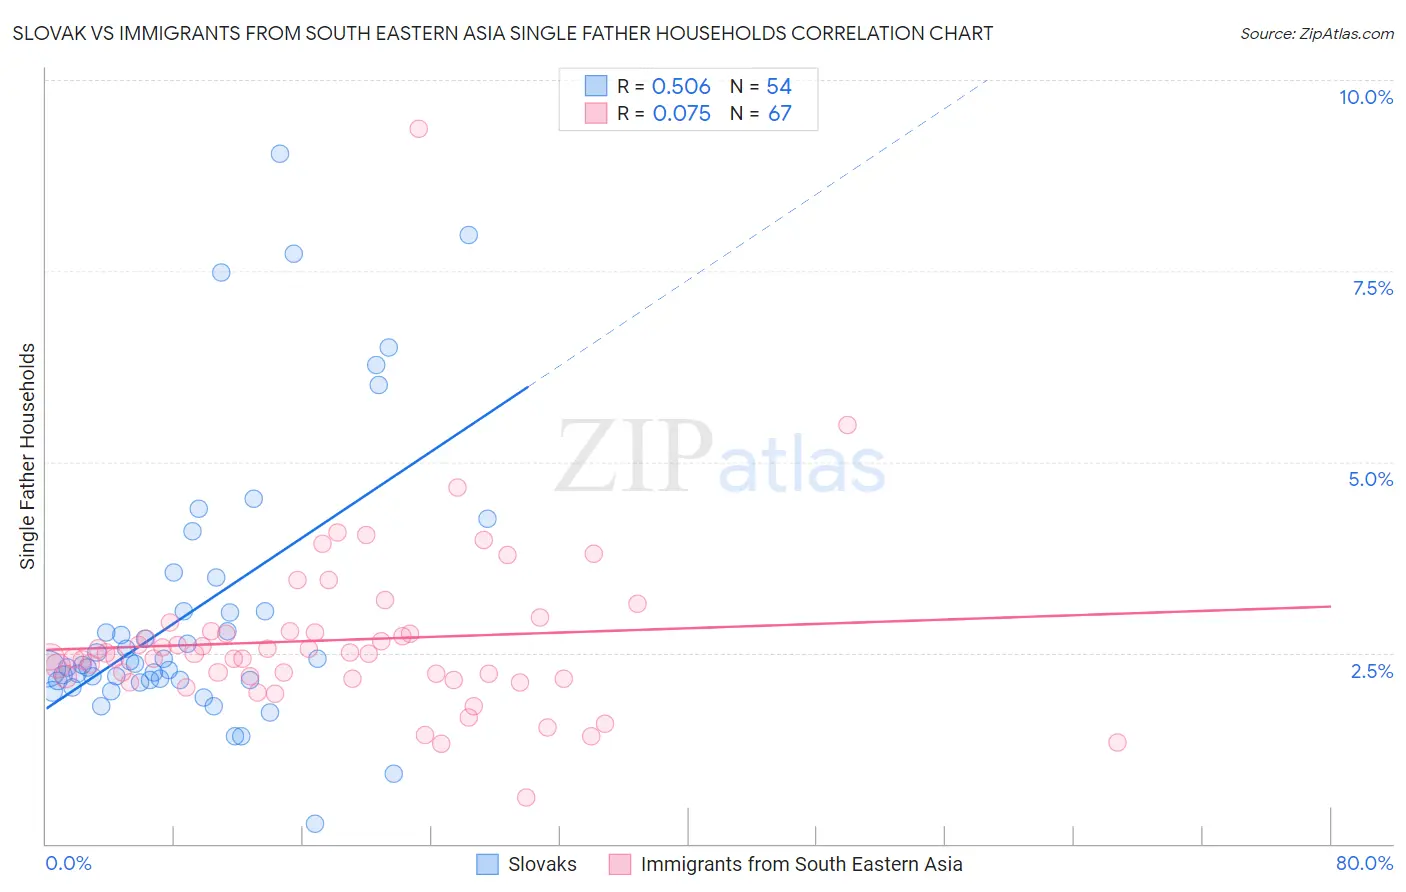 Slovak vs Immigrants from South Eastern Asia Single Father Households